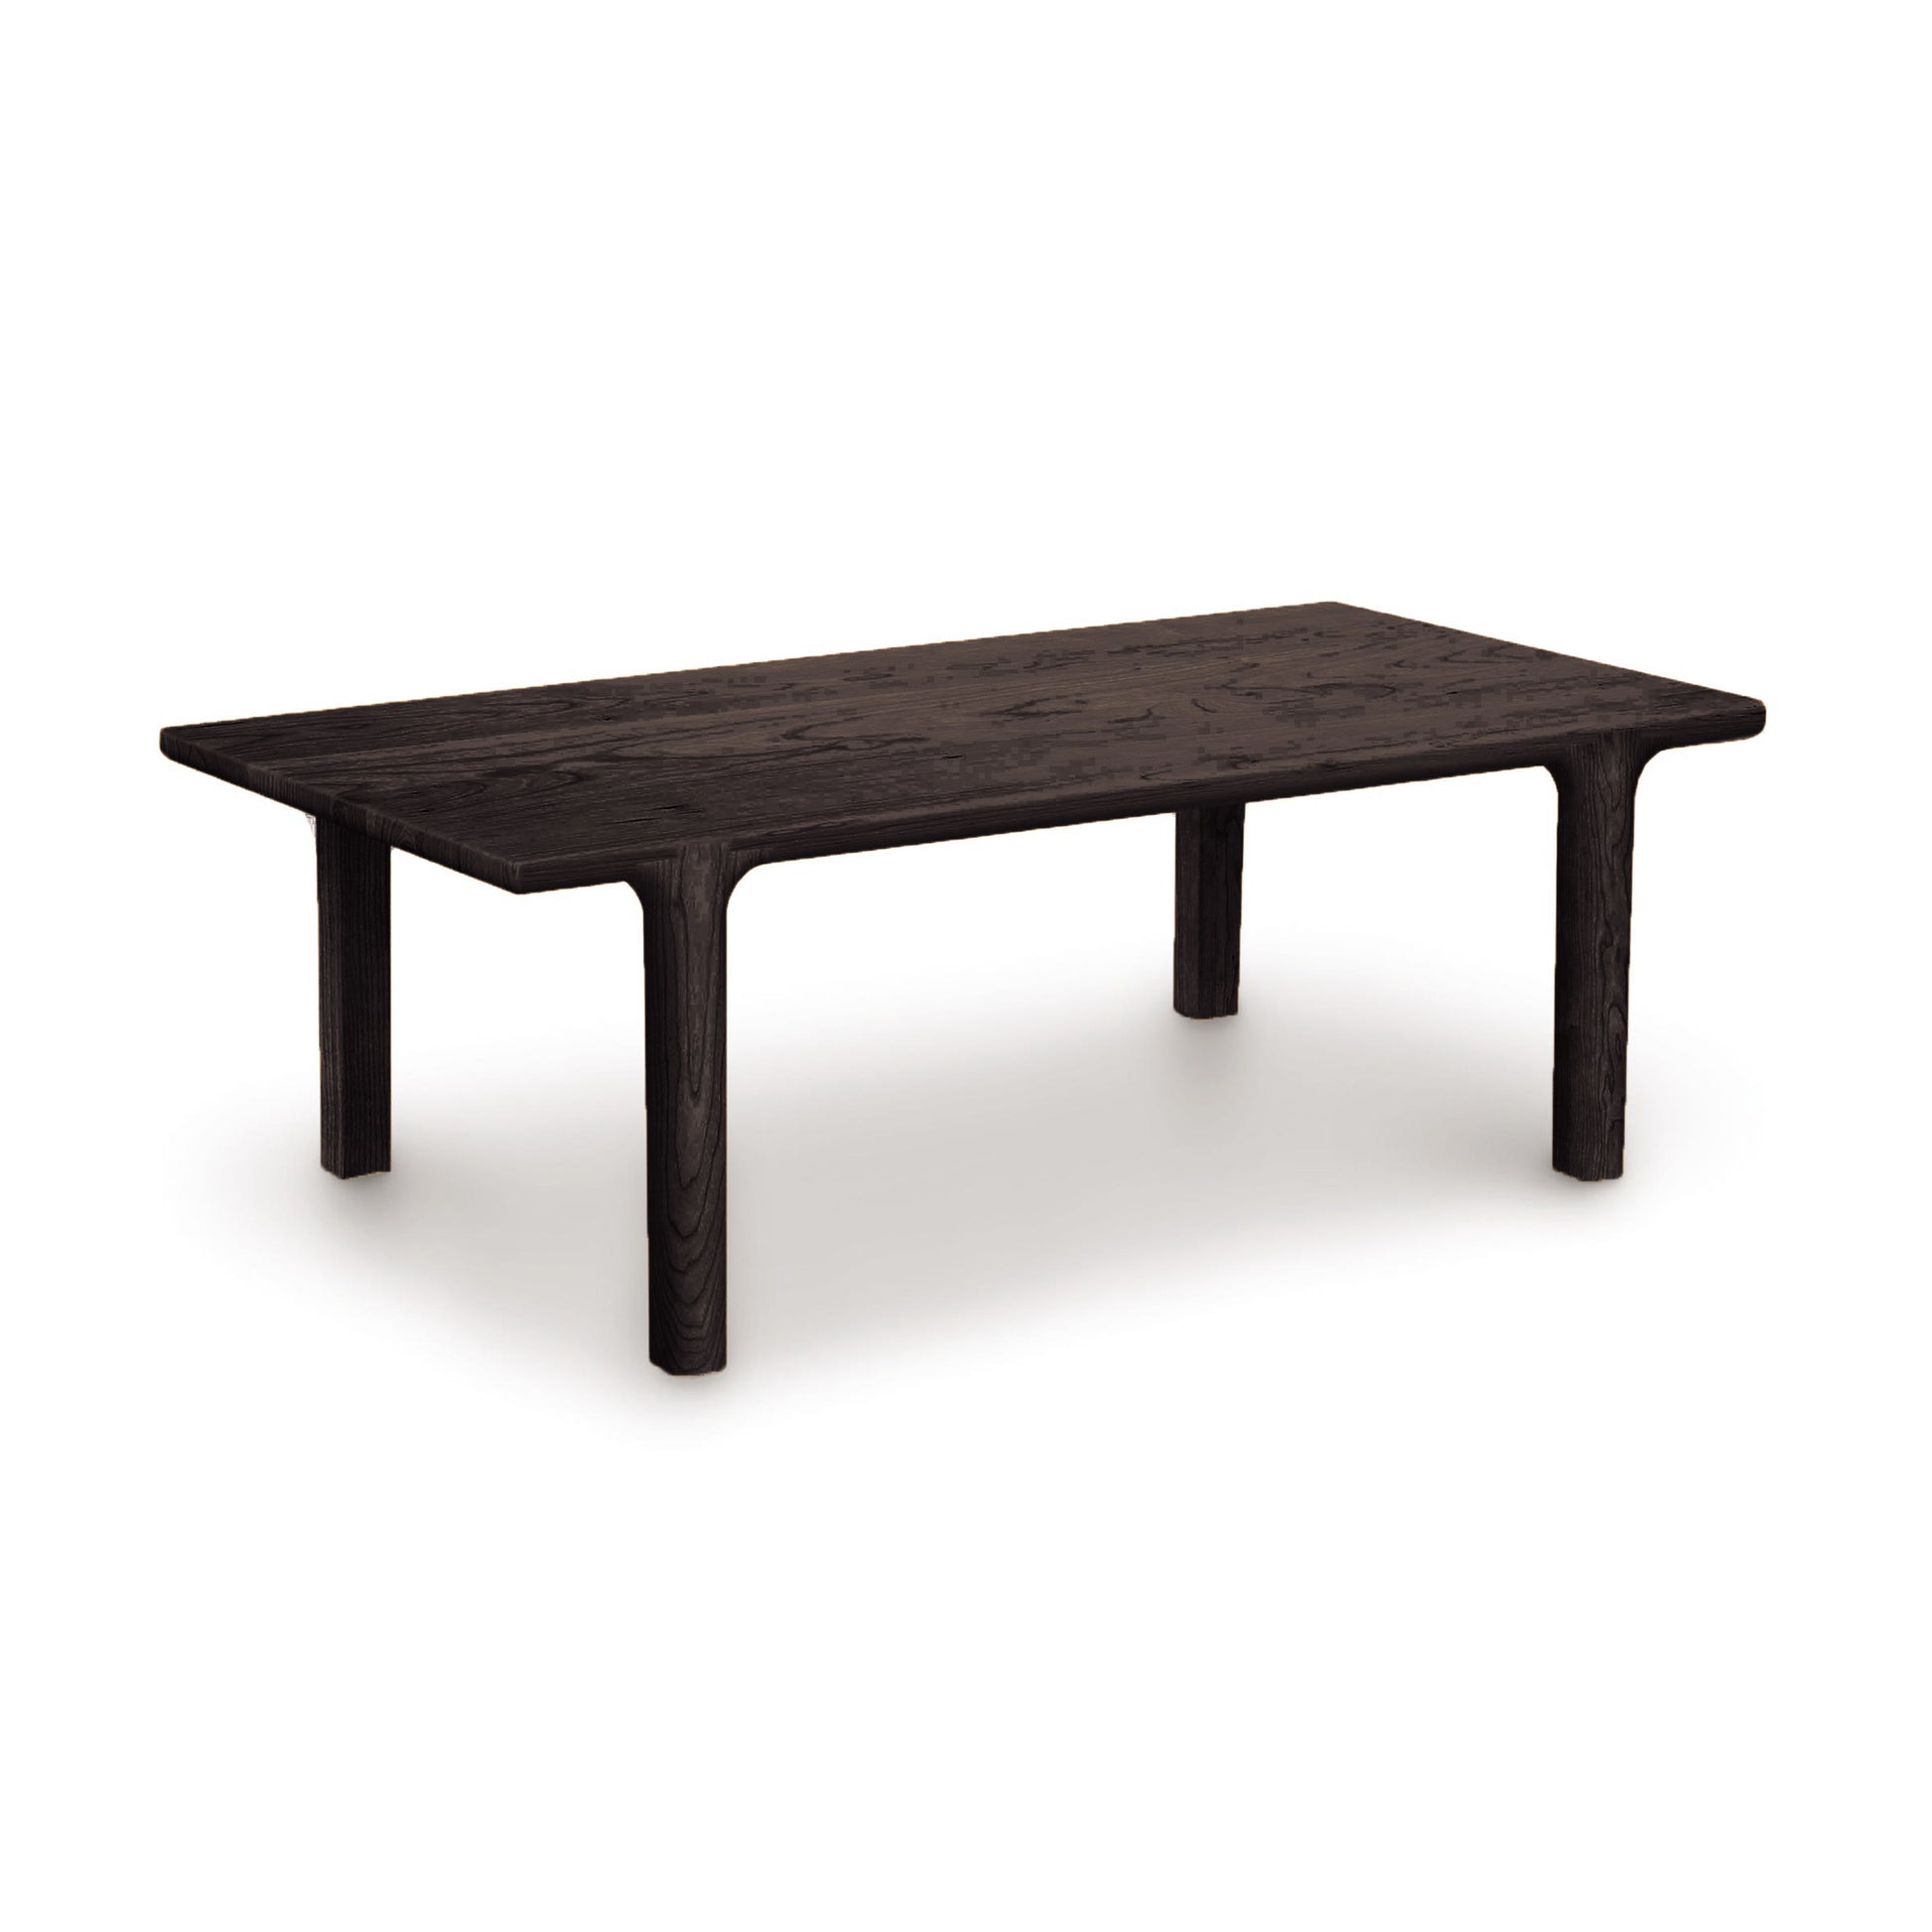 A black Copeland Furniture Sierra Rectangular Coffee Table on a white background.